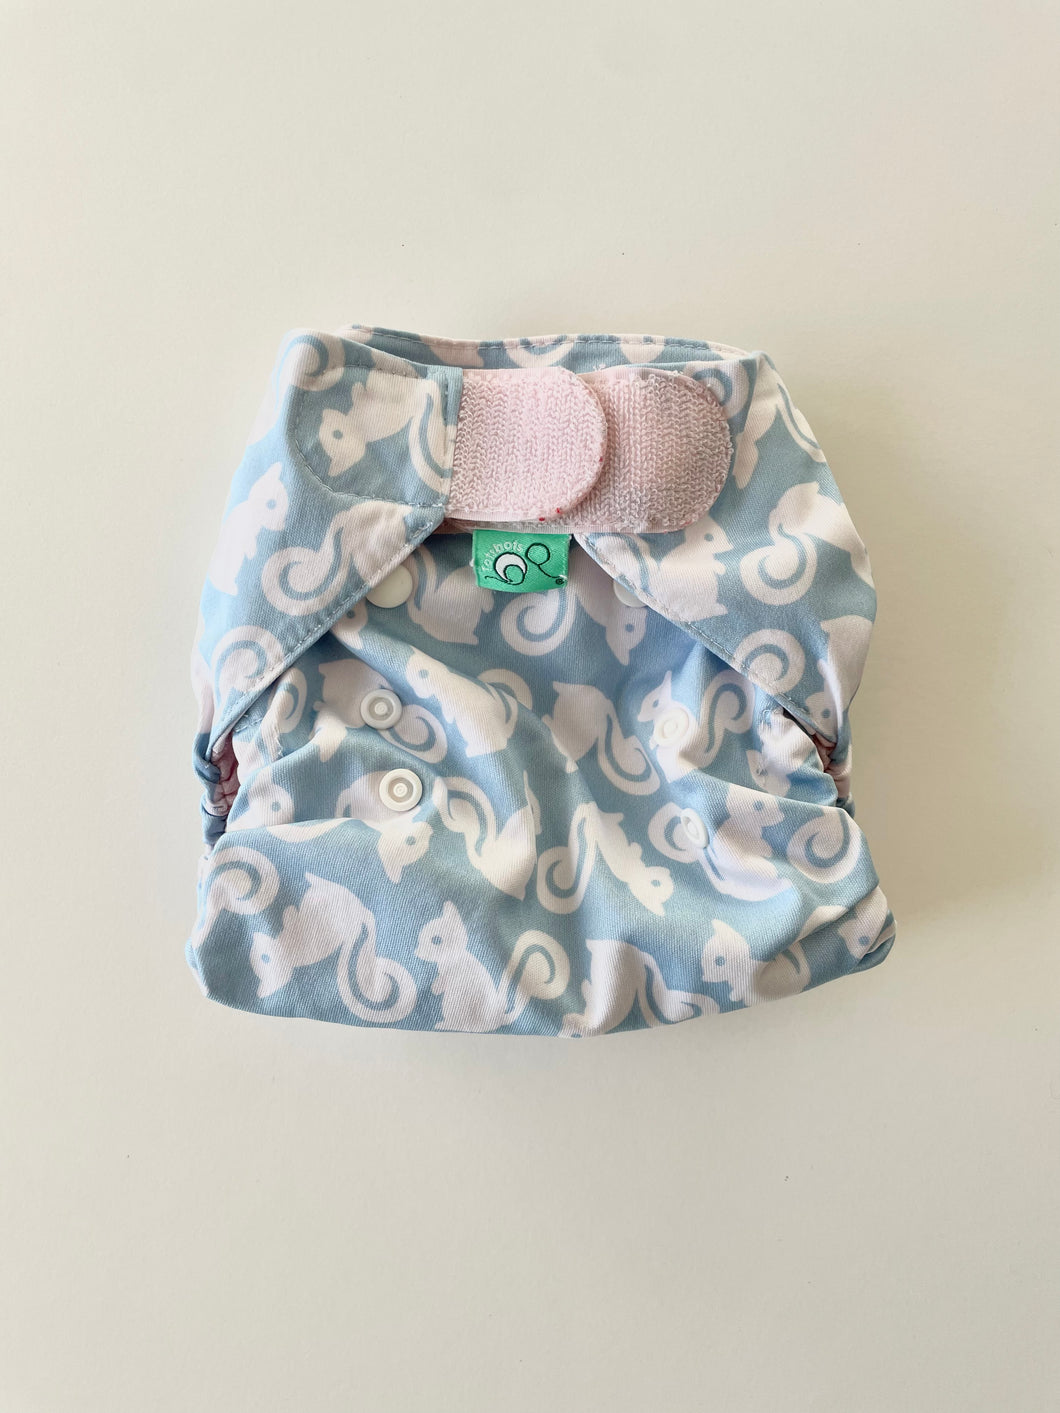 Pre-Loved TotsBots Size 2 - Nappy Cover - Squiddles